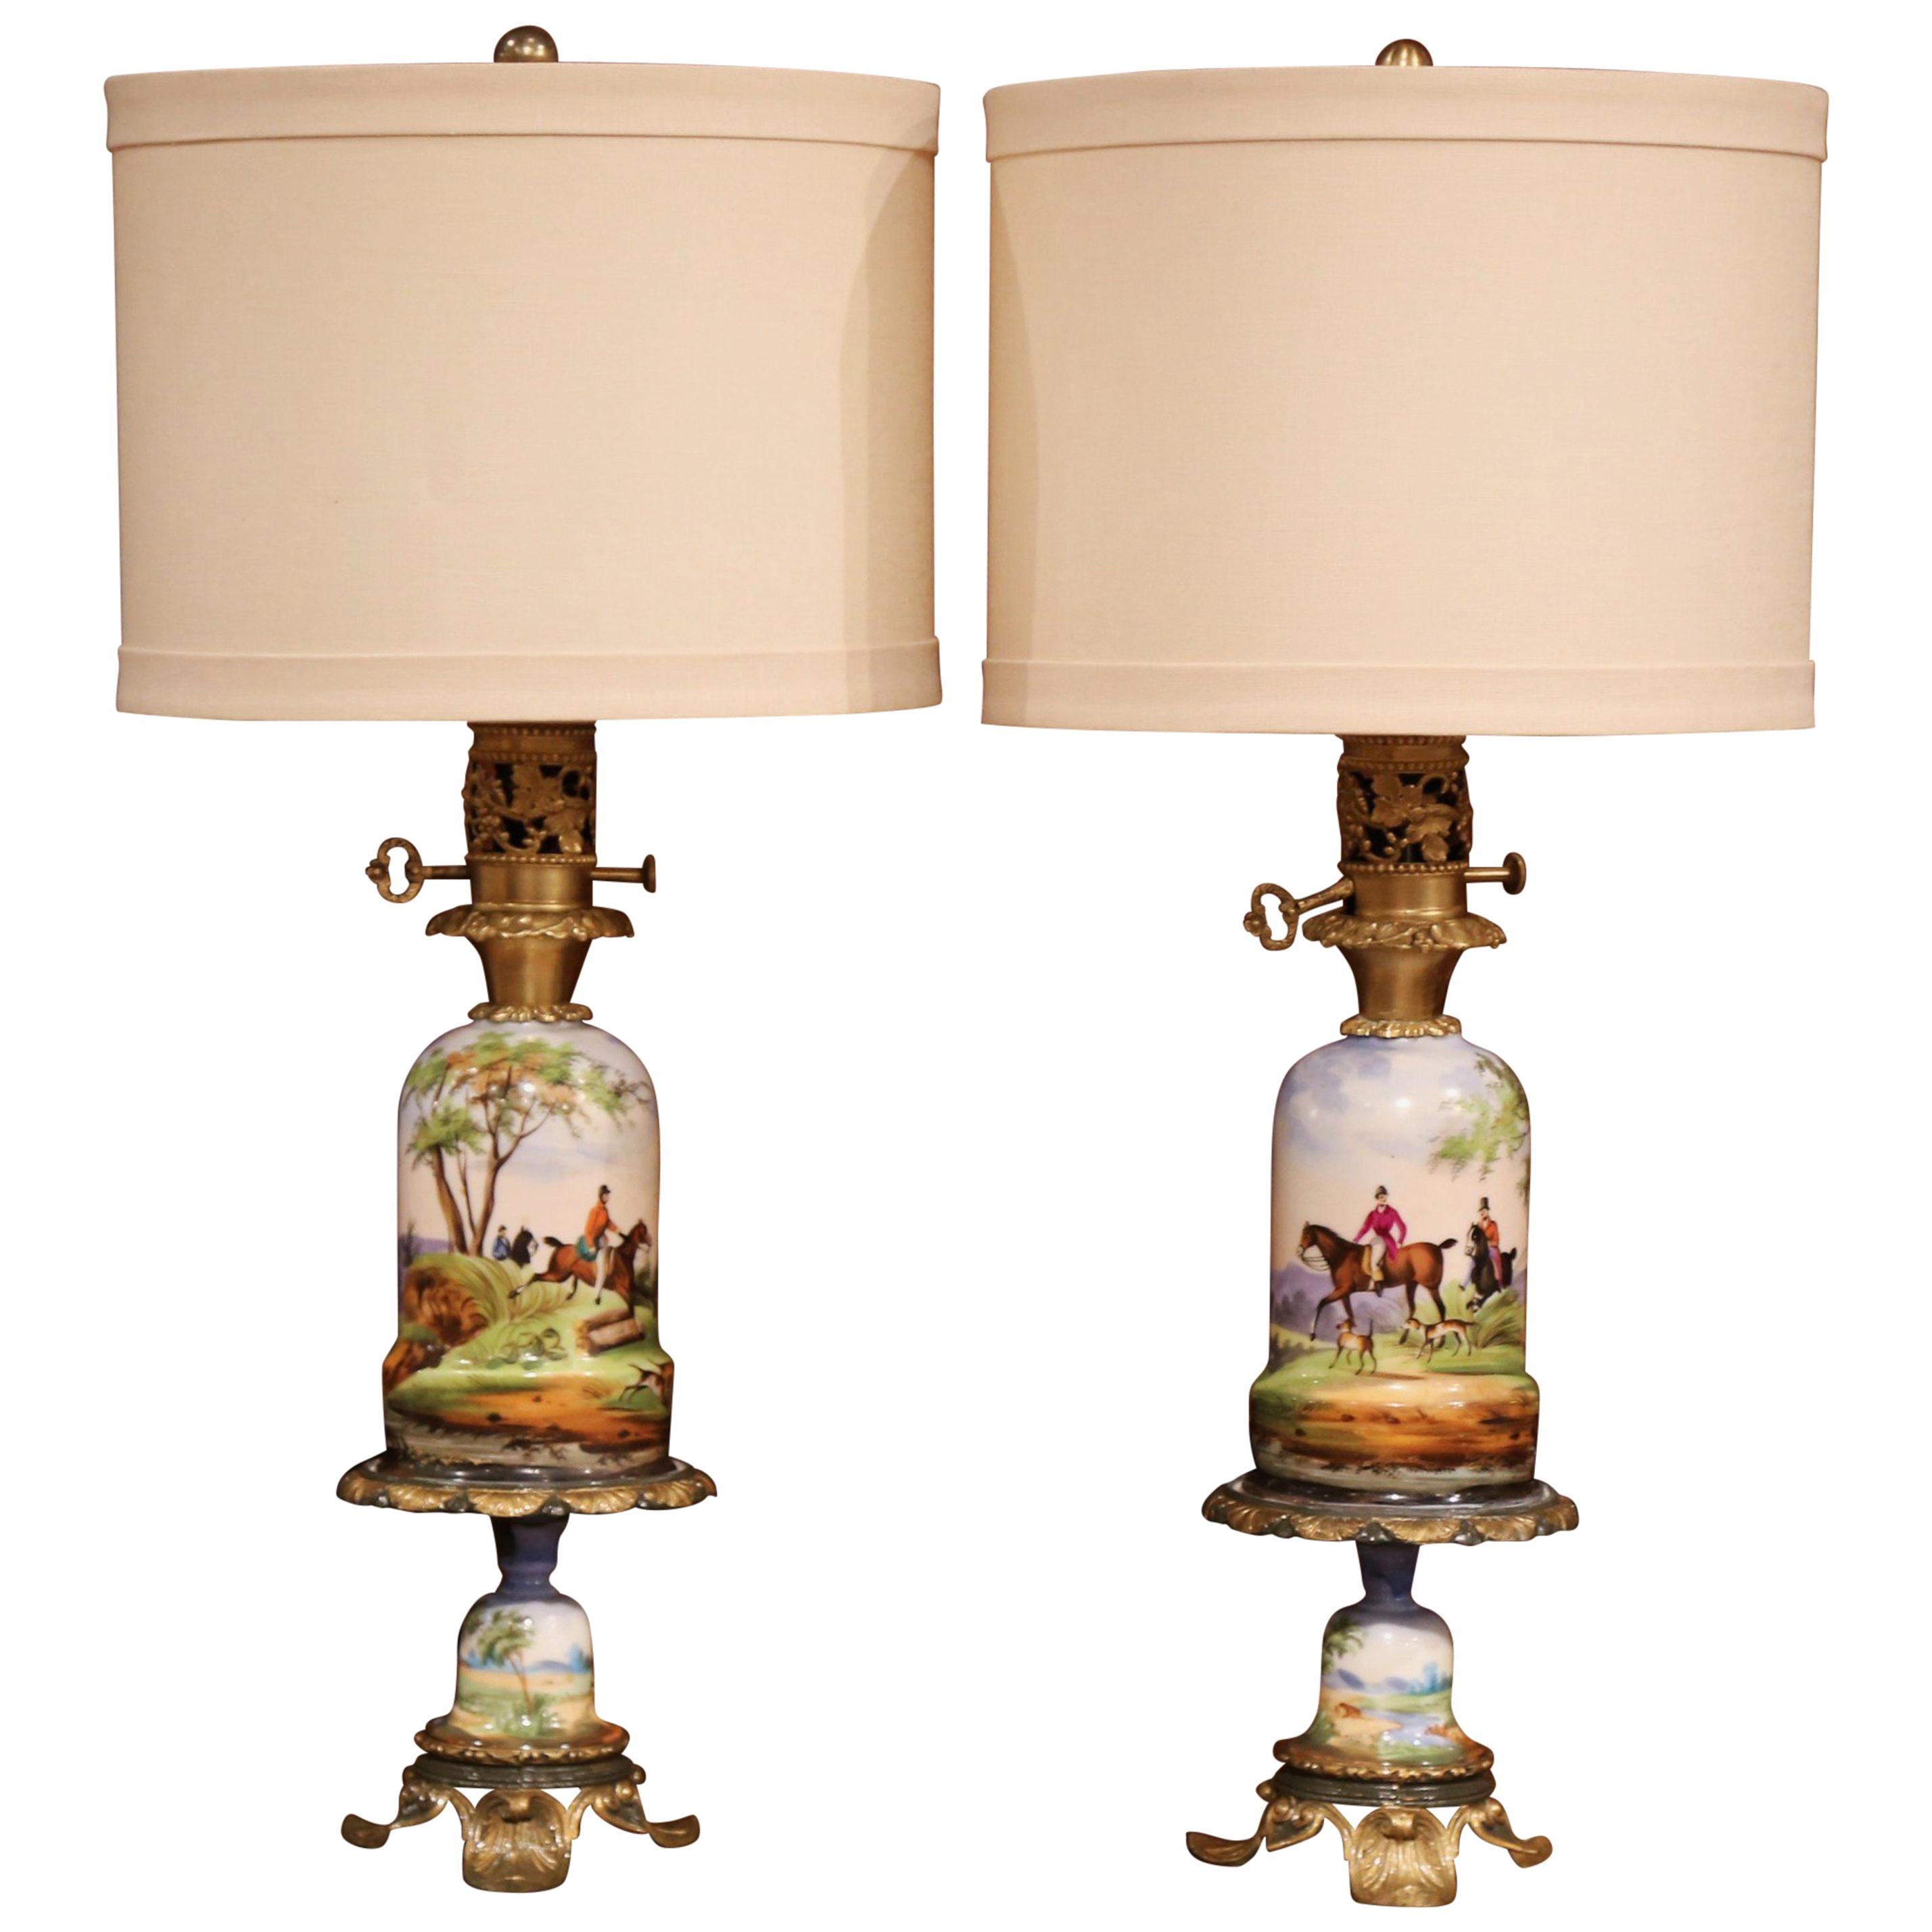 Pair of 19th Century French Painted Porcelain & Brass Oil Lamps with Hunt Scenes